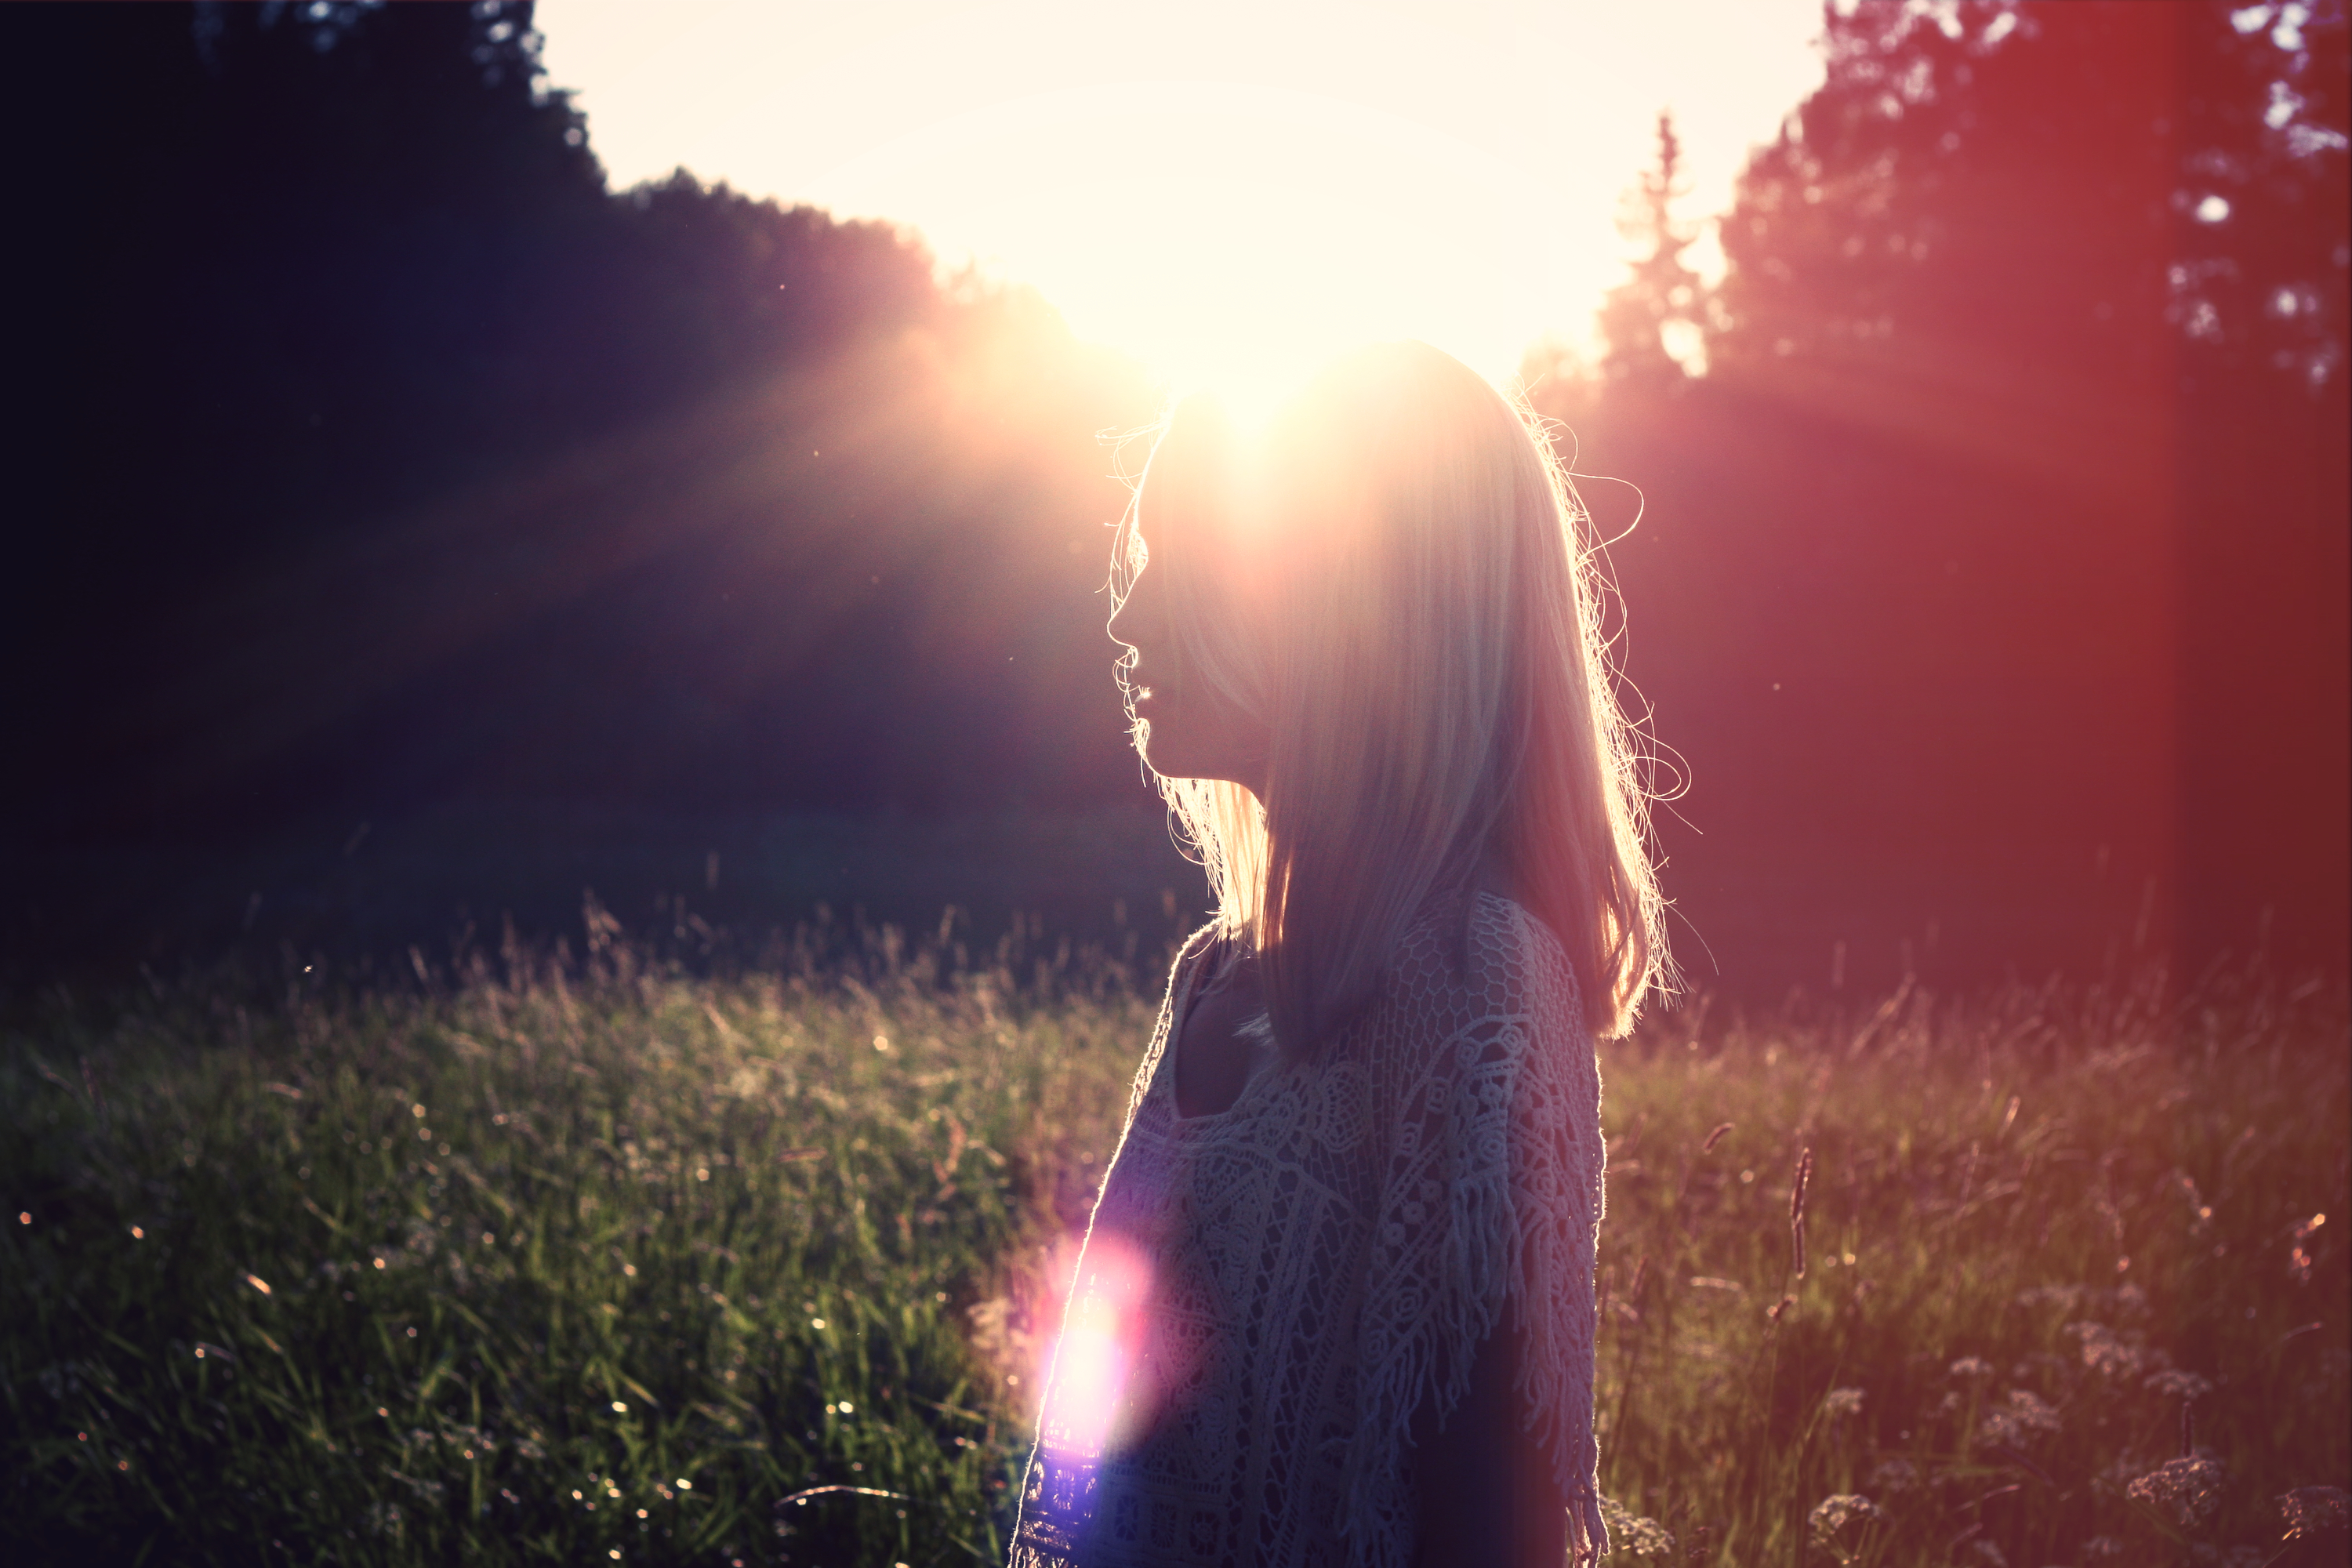 In this image, a woman stands in a sunlit field with tall grasses swaying in the breeze. She appears peaceful and content. The warm golden light of the sun illuminates her surroundings, creating a serene and calming atmosphere. The image is relevant to CBT therapy in CT as it evokes a sense of mindfulness and relaxation, which are key components of Cognitive Behavioral Therapy.